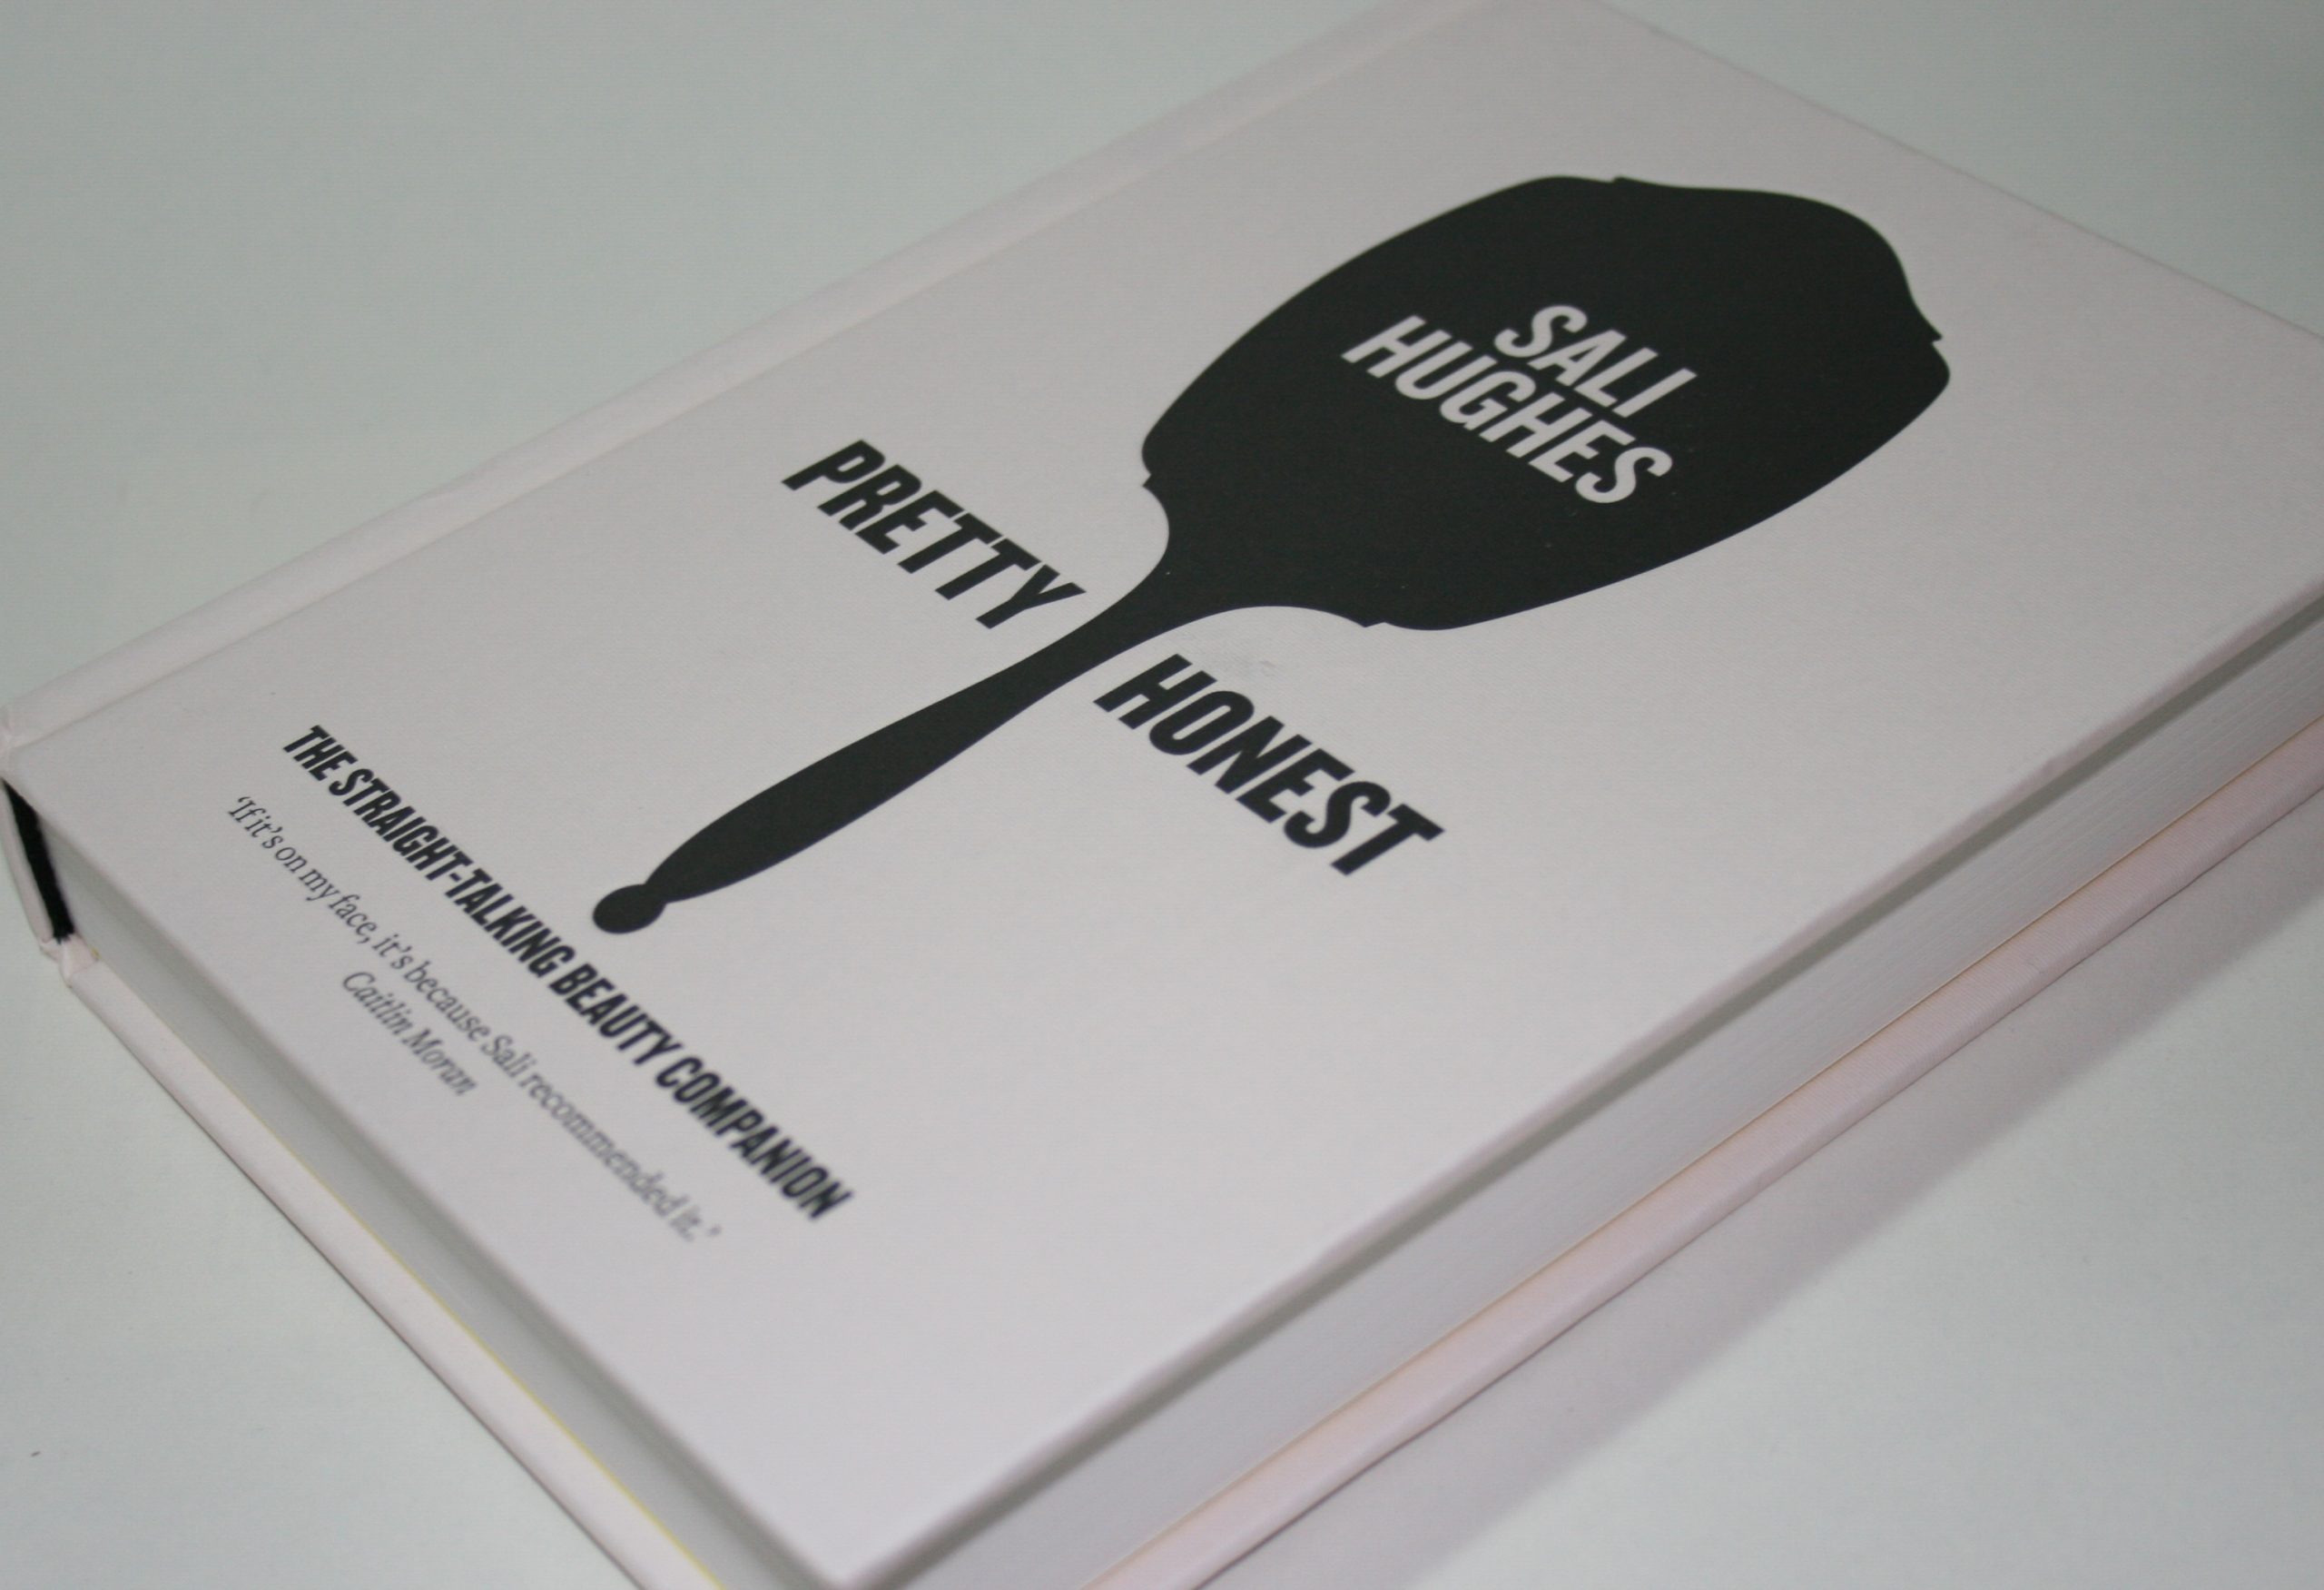 Pretty Honest by Sali Hughes – Review and Competition